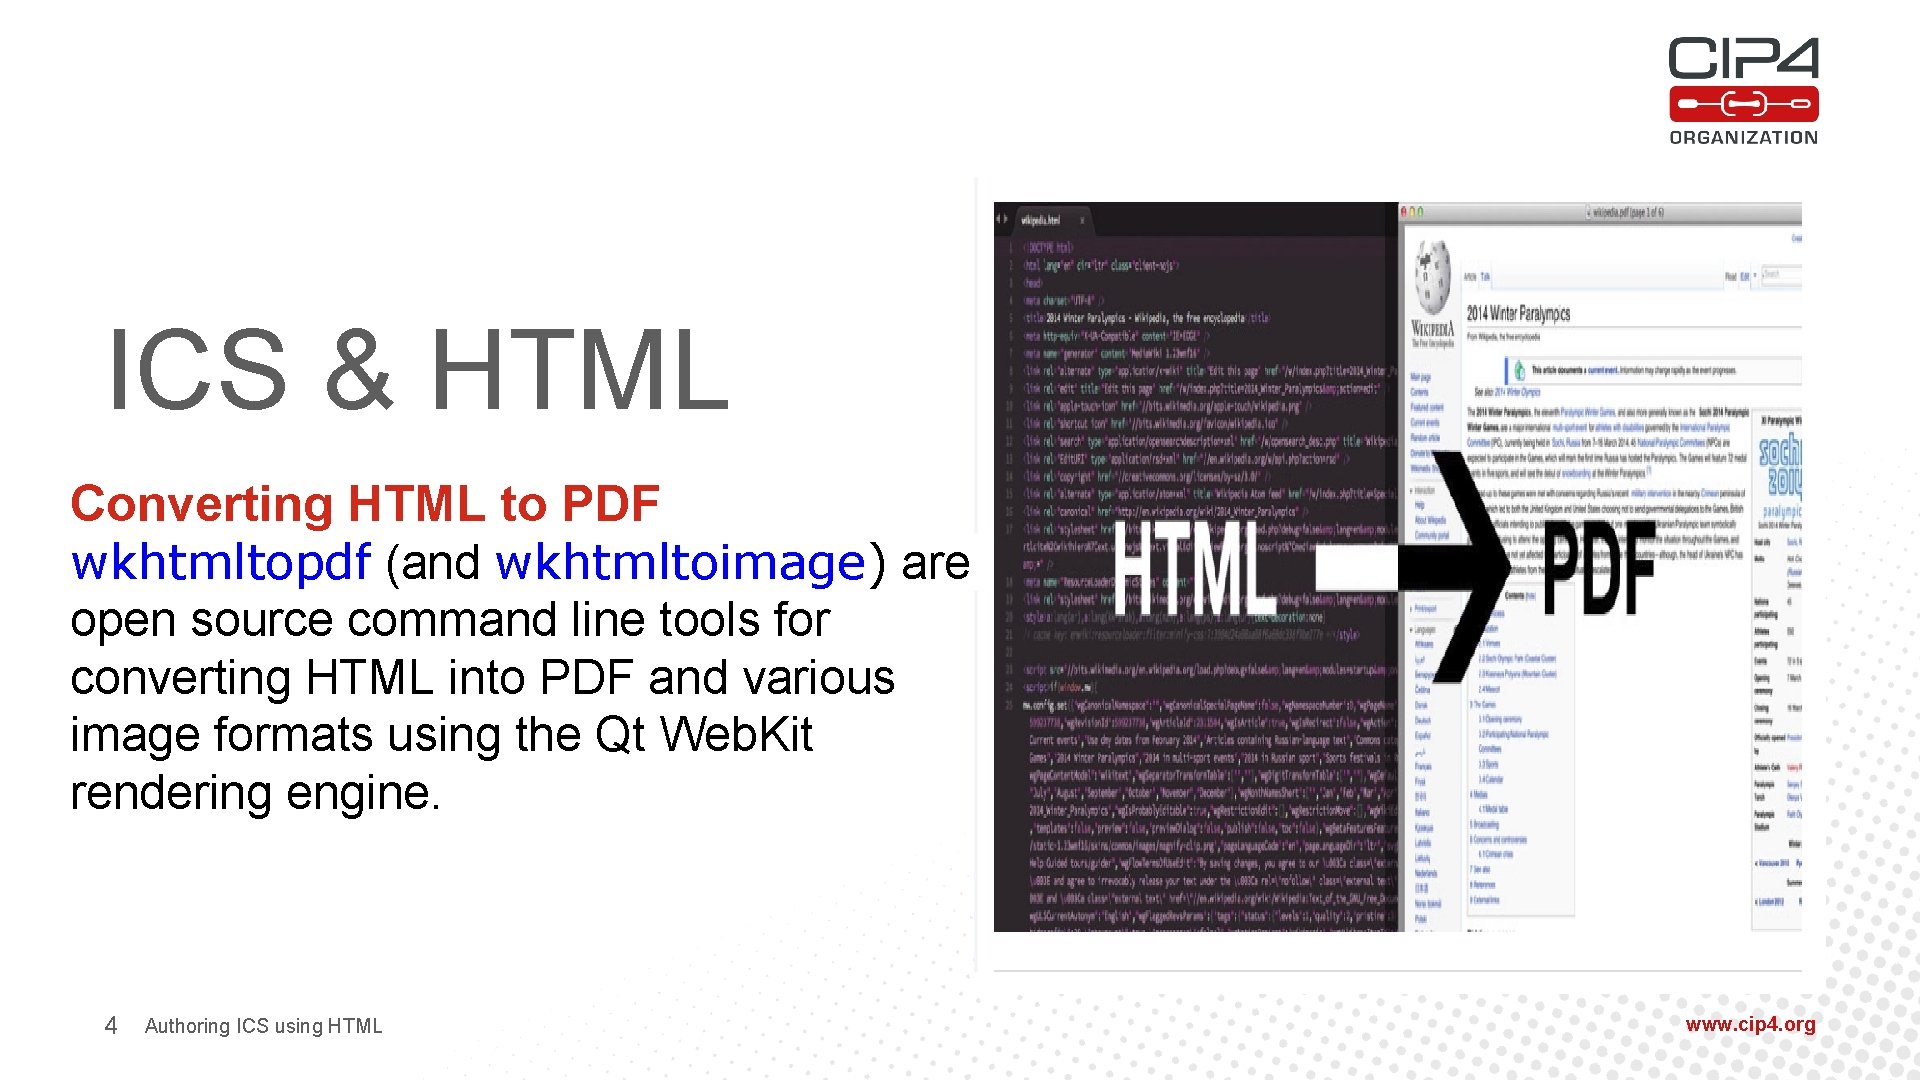 ICS & HTML Converting HTML to PDF wkhtmltopdf (and wkhtmltoimage) are open source command